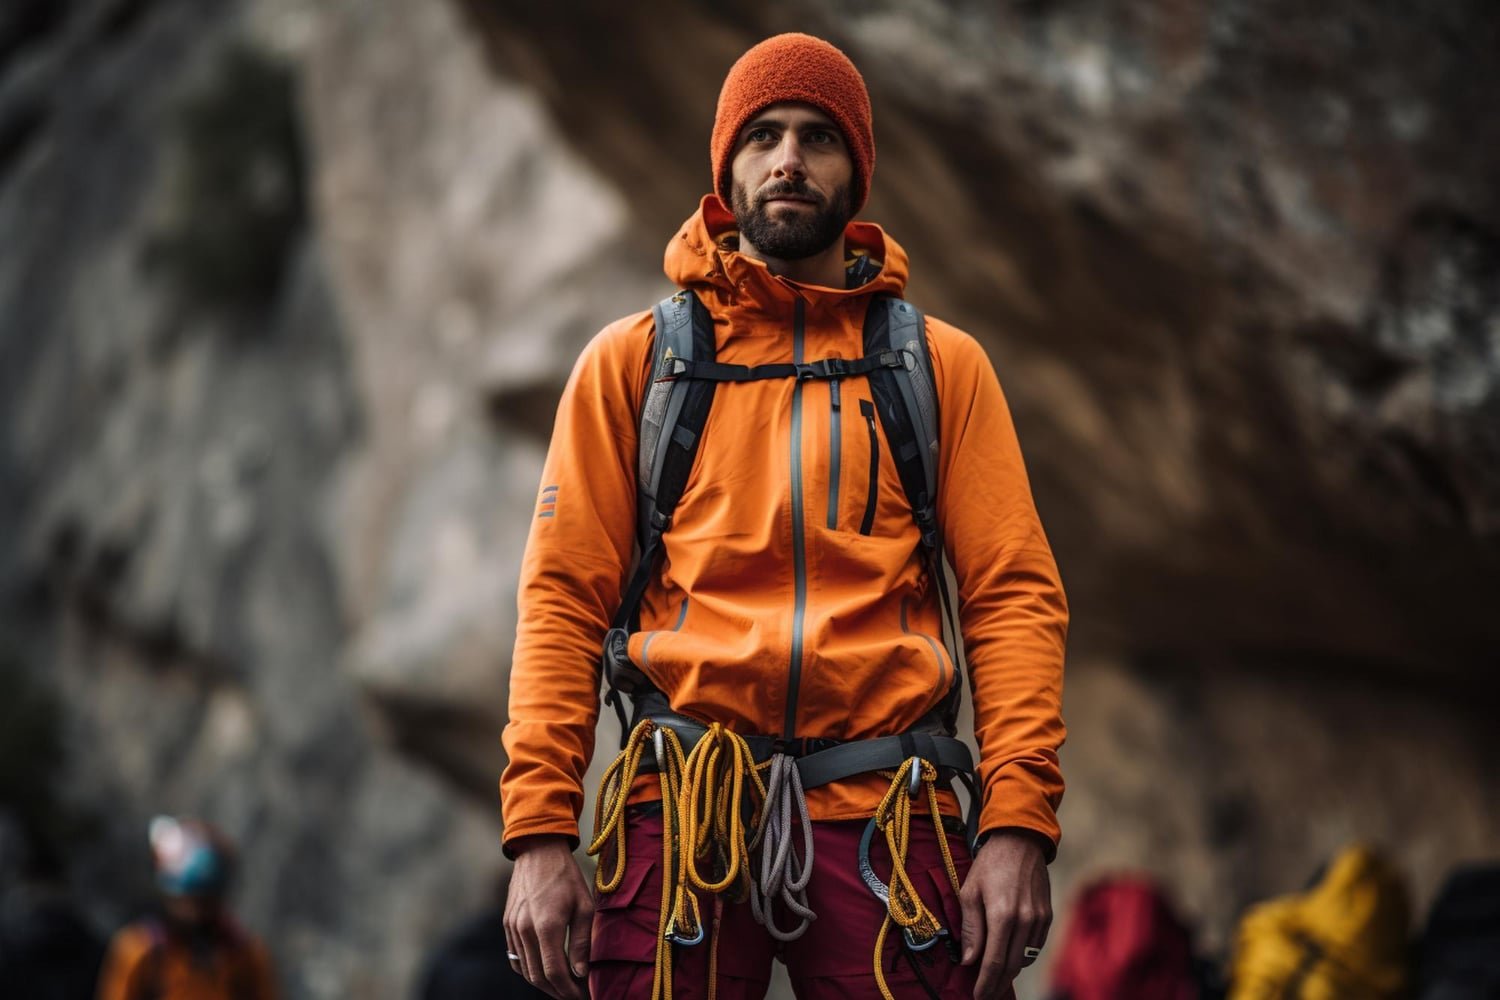 The North Face Ultimate Outdoor Gear for Adventure